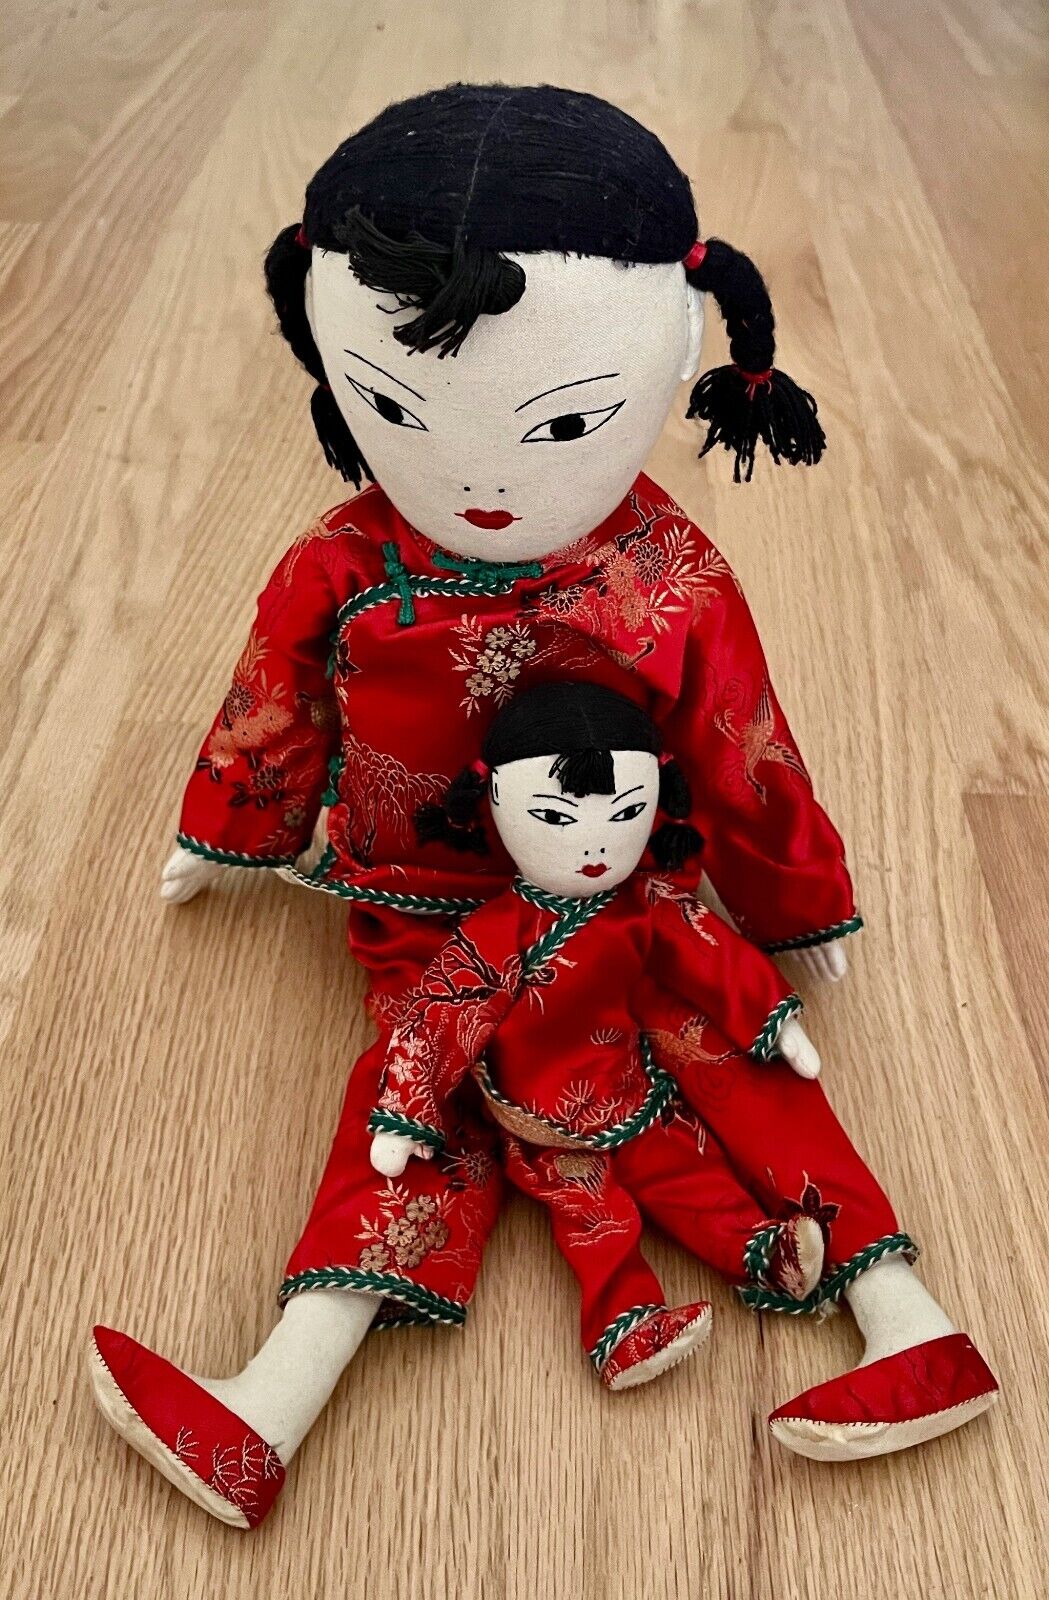 Ada Lum Asian Dolls, Mom and Child with Sling, Embroided, Stitched Cloth Dolls